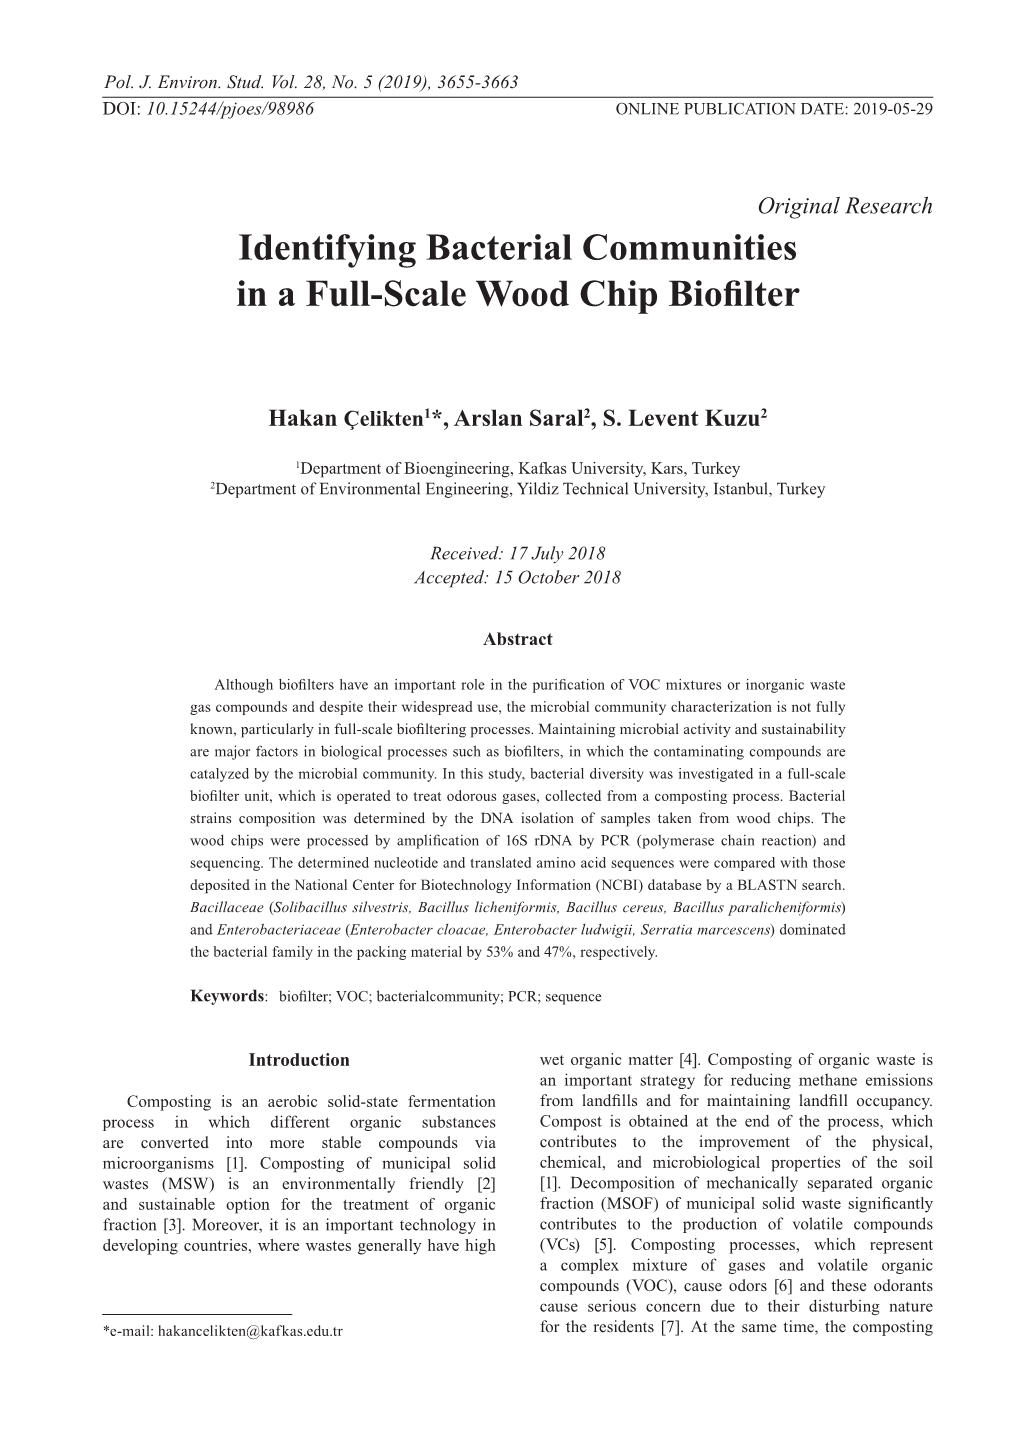 Identifying Bacterial Communities in a Full-Scale Wood Chip Biofilter